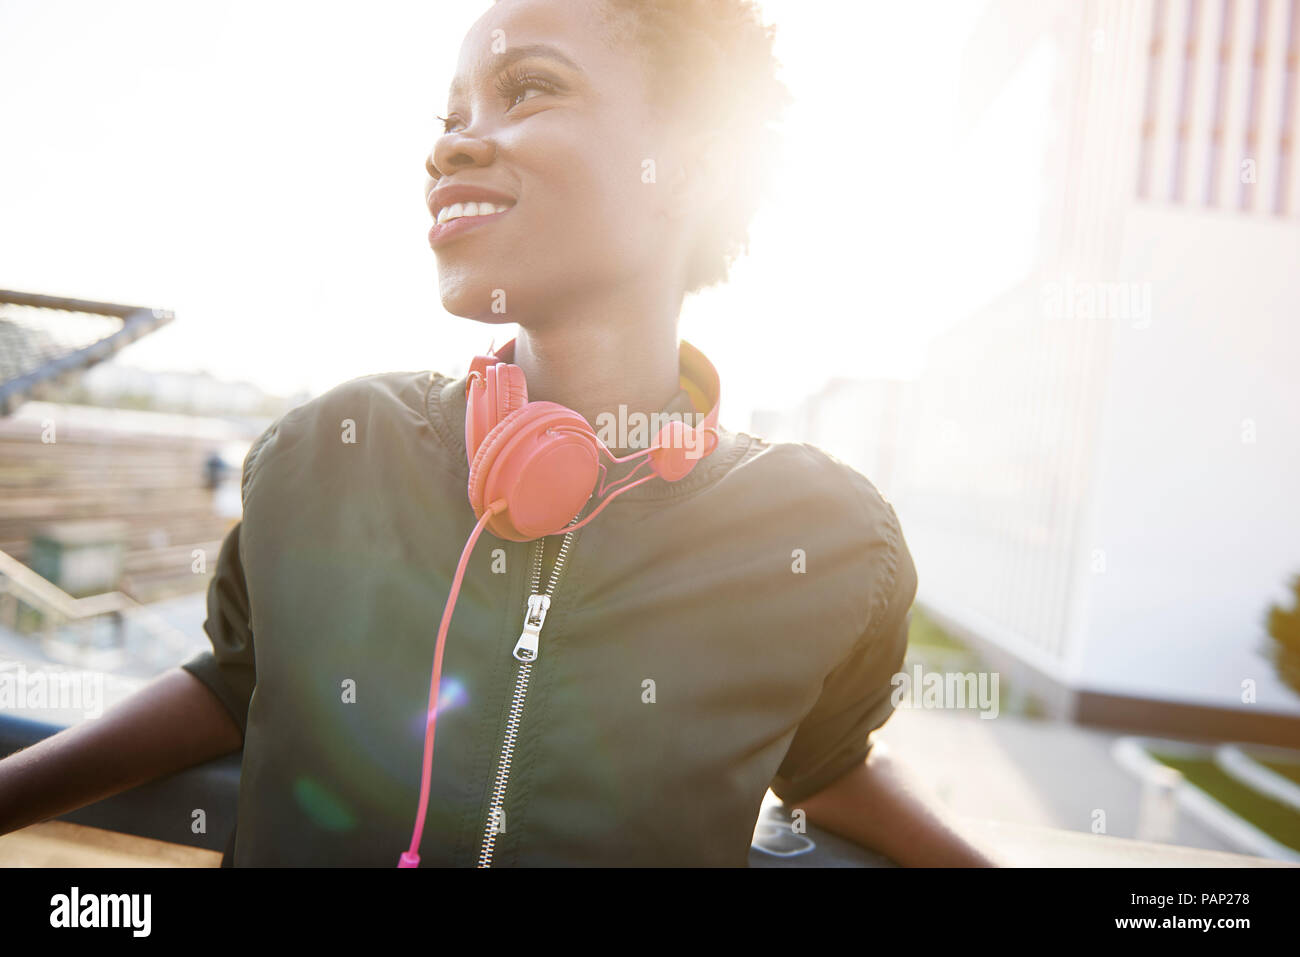 Smiling young woman with headphones at backlight Stock Photo